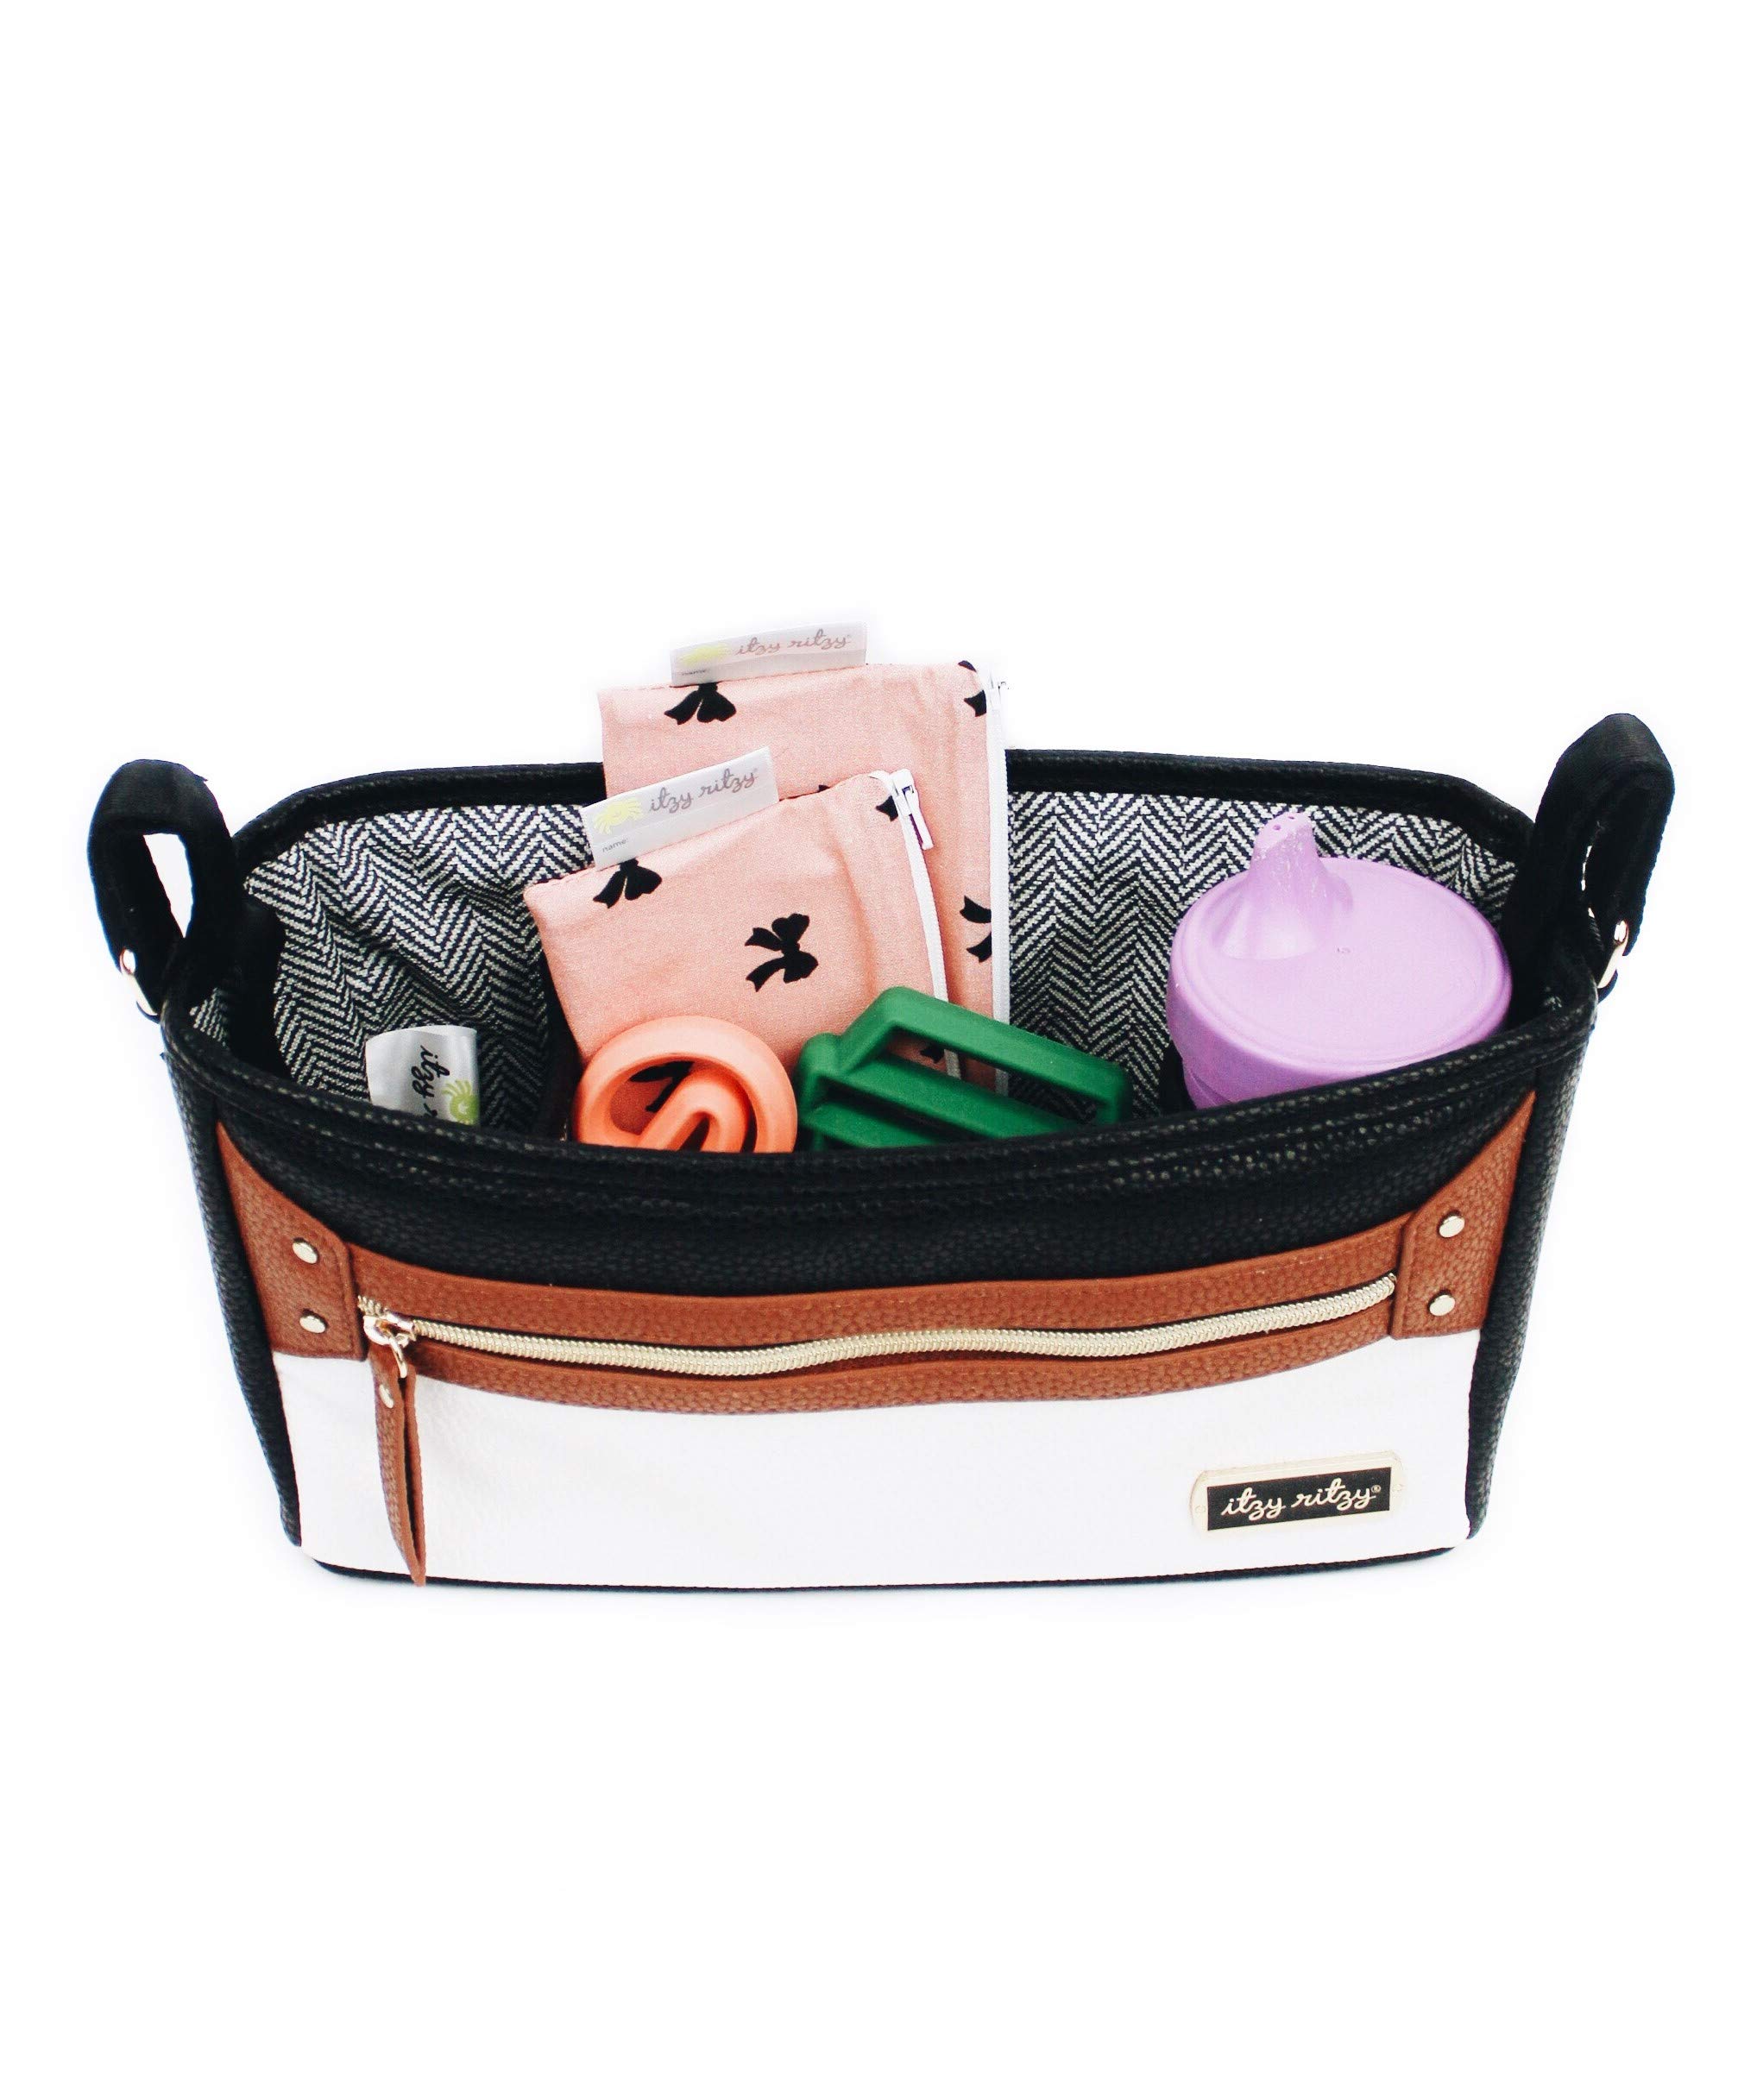 Itzy Ritzy Adjustable Stroller Caddy / Organizer Featuring Two Built-in Front Zippered Pocket and Adjustable Straps to Fit Nearly Any Stroller, Coffee and Cream